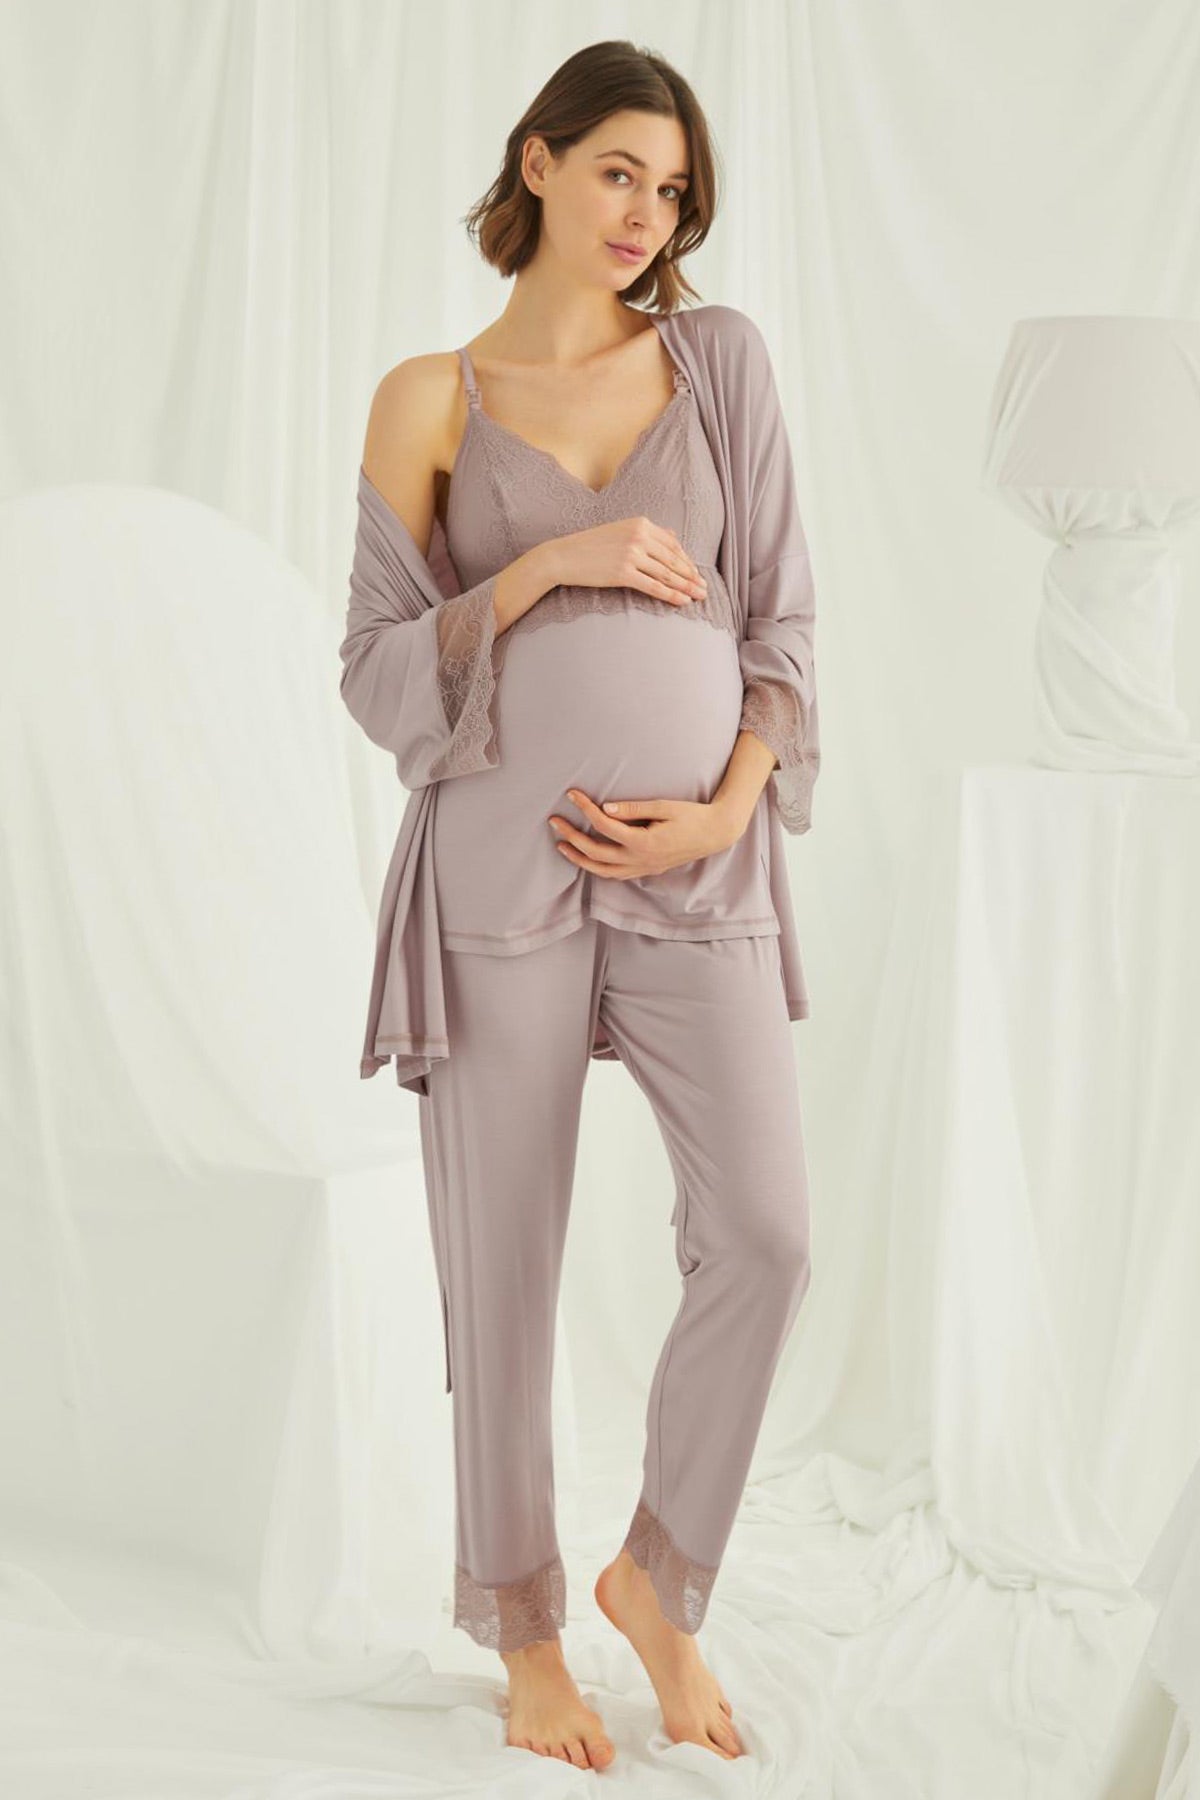 Shopymommy 18431 Lace Strappy 3-Pieces Maternity & Nursing Pajamas With Robe Coffee